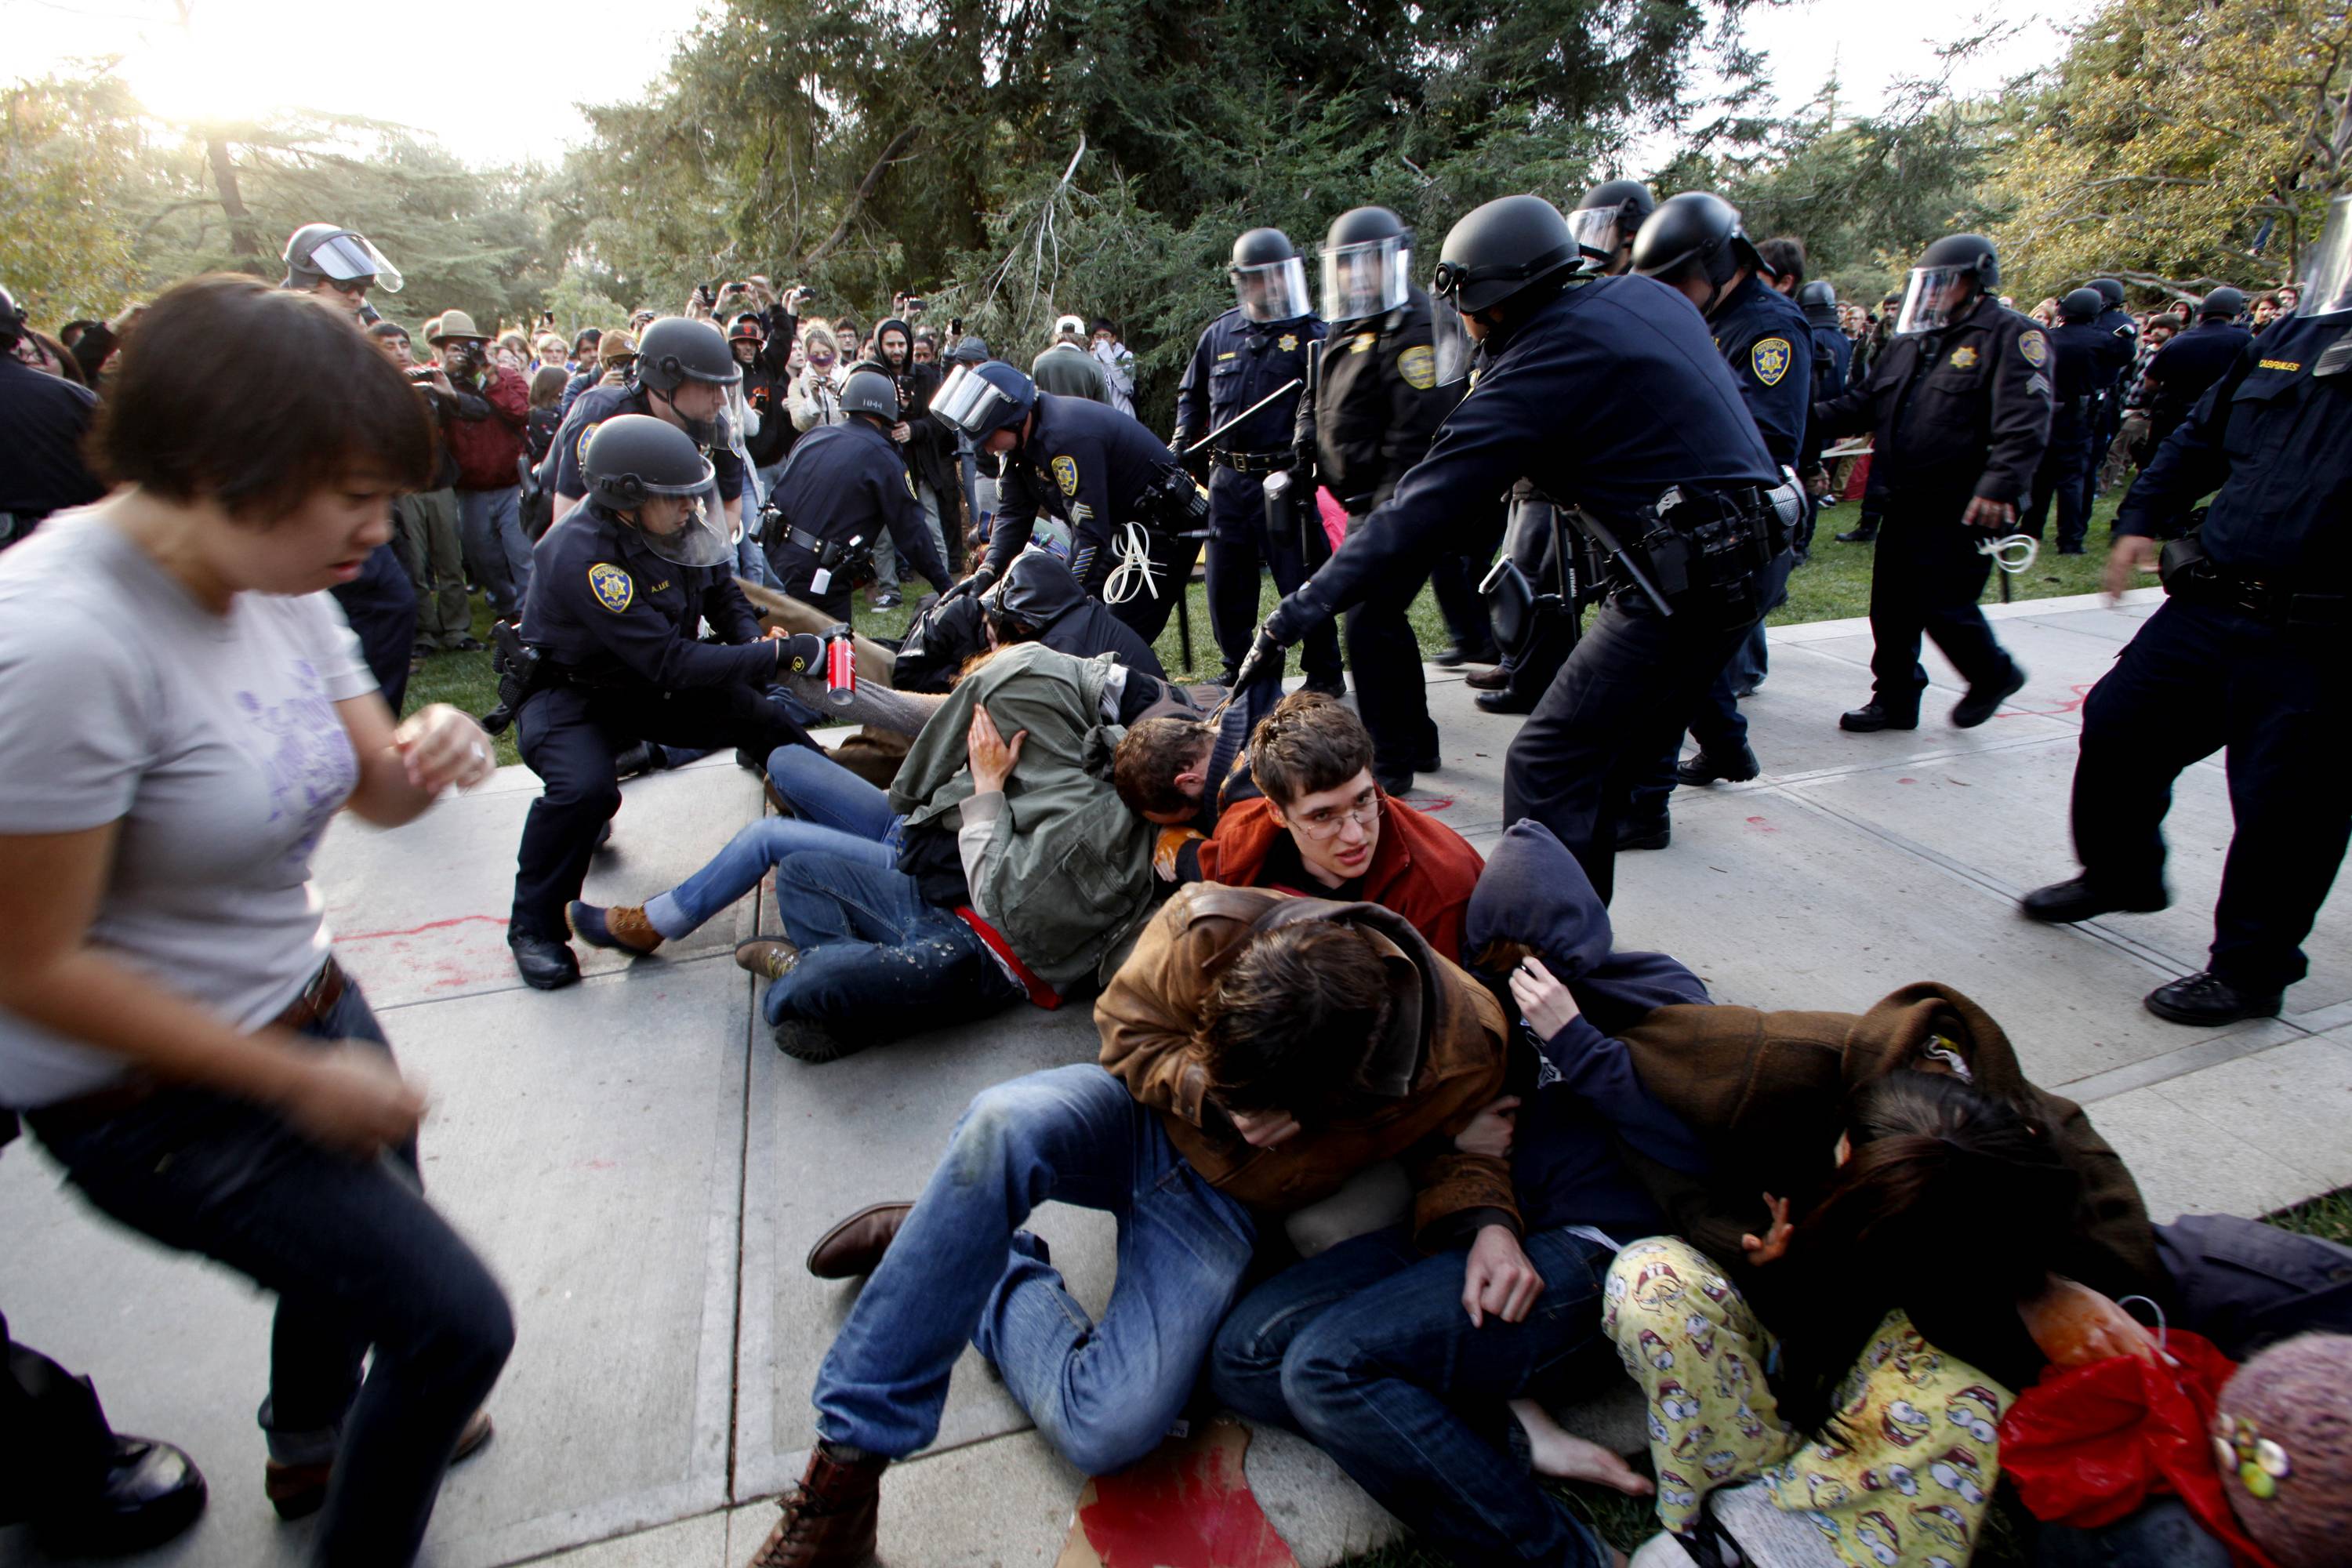 Investigation Launched After Police Pepper Spray Occupy Protesters&nbsp; - The president of the University of California college system plans to review law enforcement procedures on all 10 campuses after Occupy protesters were doused with pepper spray by campus police on Nov. 18. Two officers were placed on administrative leave in the incident.(Photo: AP Photo/The Enterprise, Wayne Tilcock)